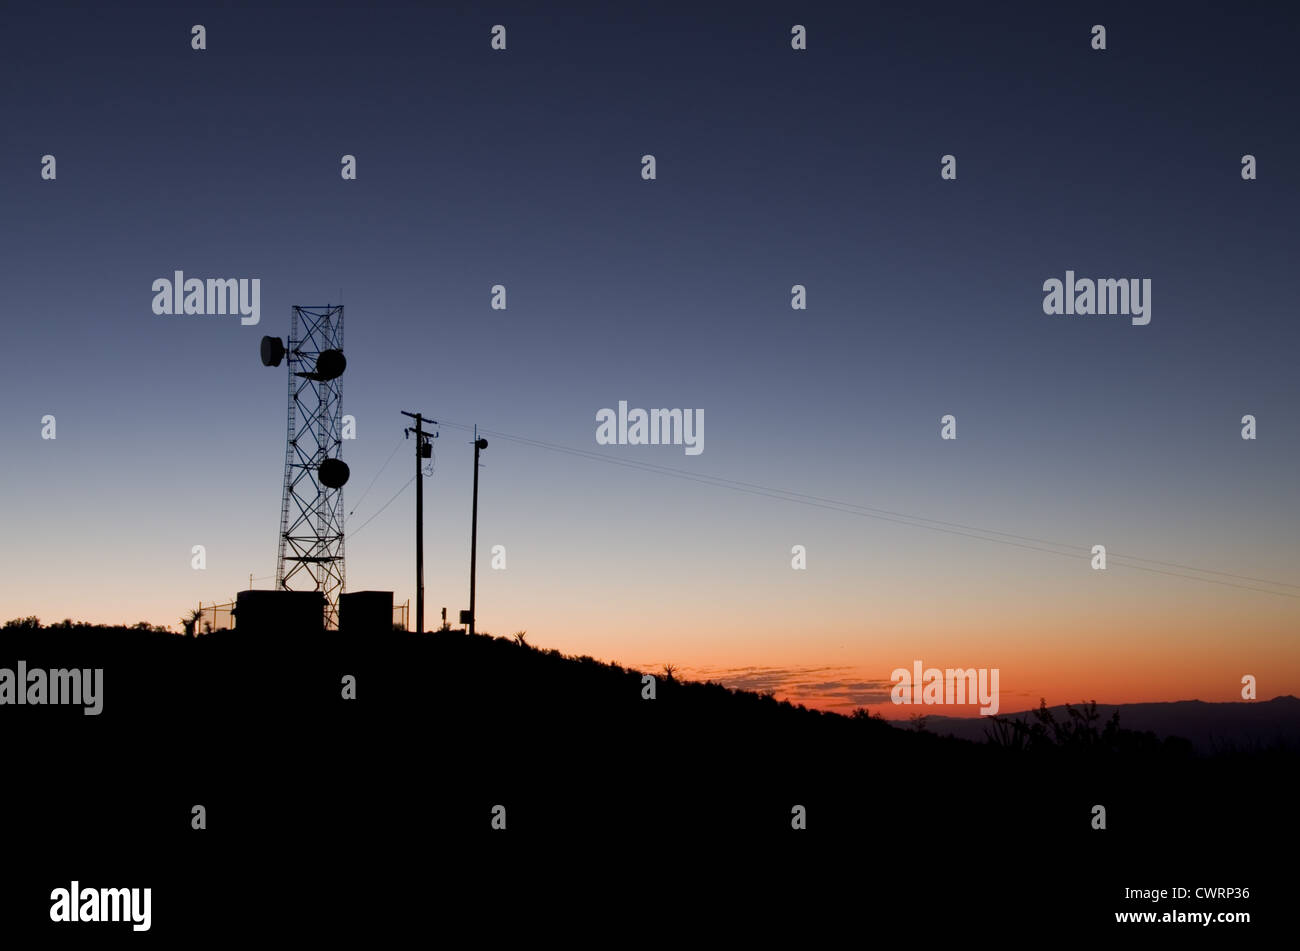 silhouette of a microwave antenna tower against an evening sky Stock Photo